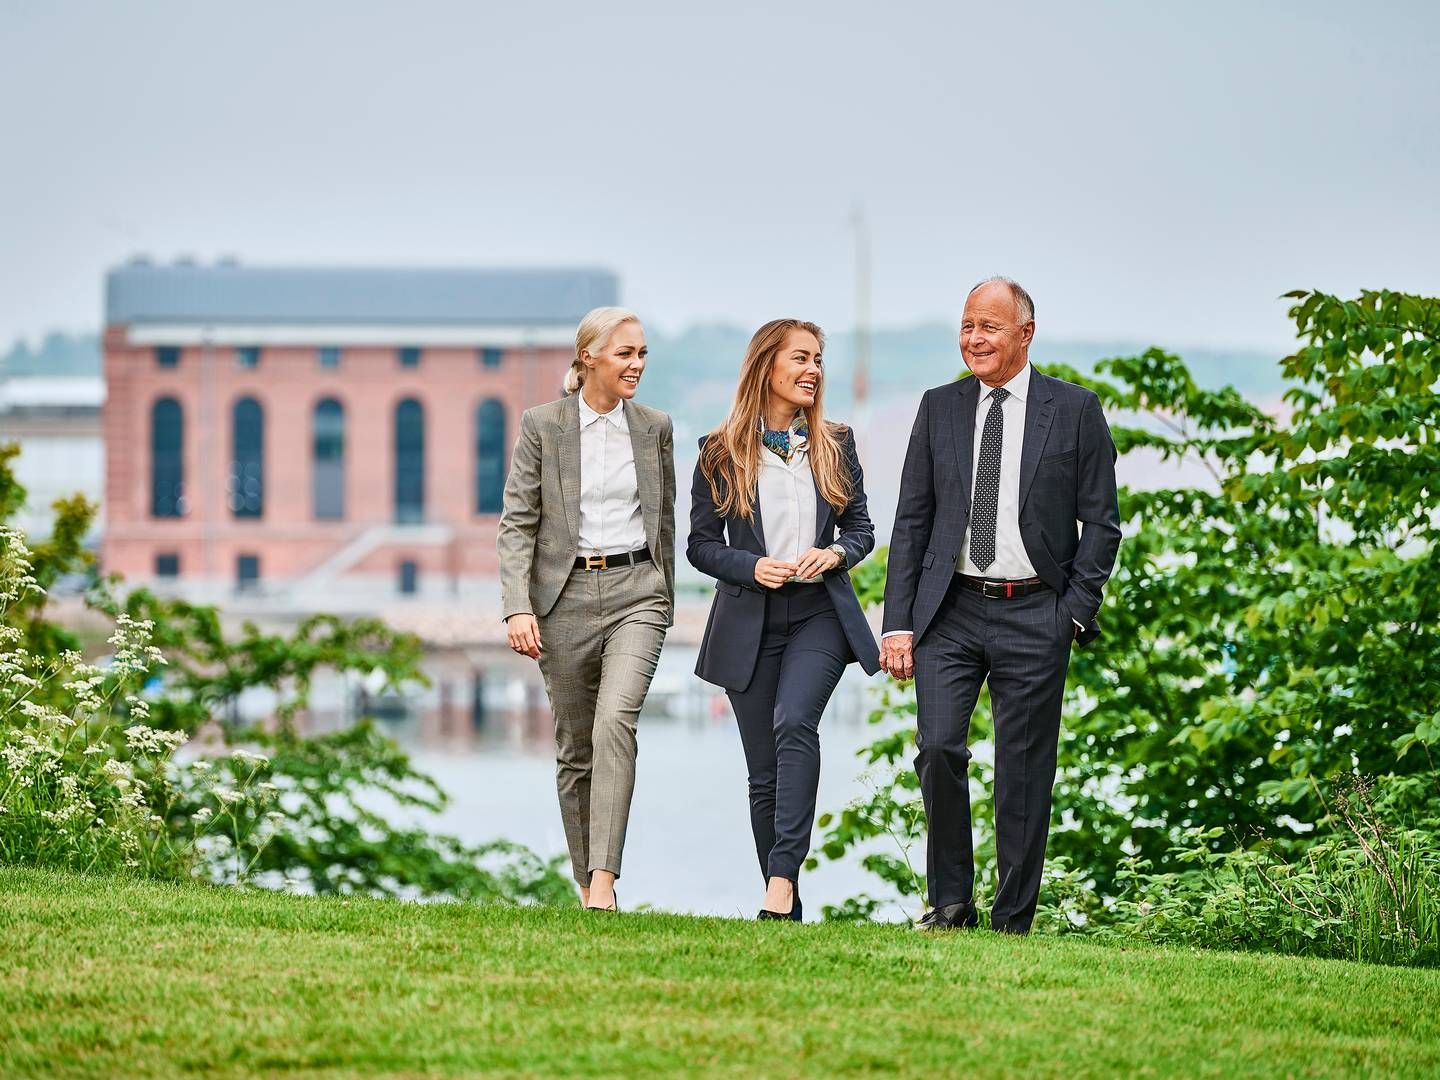 Torben Østergaard-Nielsen and his two daughters, Nina Østergaard Borris and Mia Østergaard Rechnitzer, are now focusing even more on energy trading. | Photo: Pr / Ustc